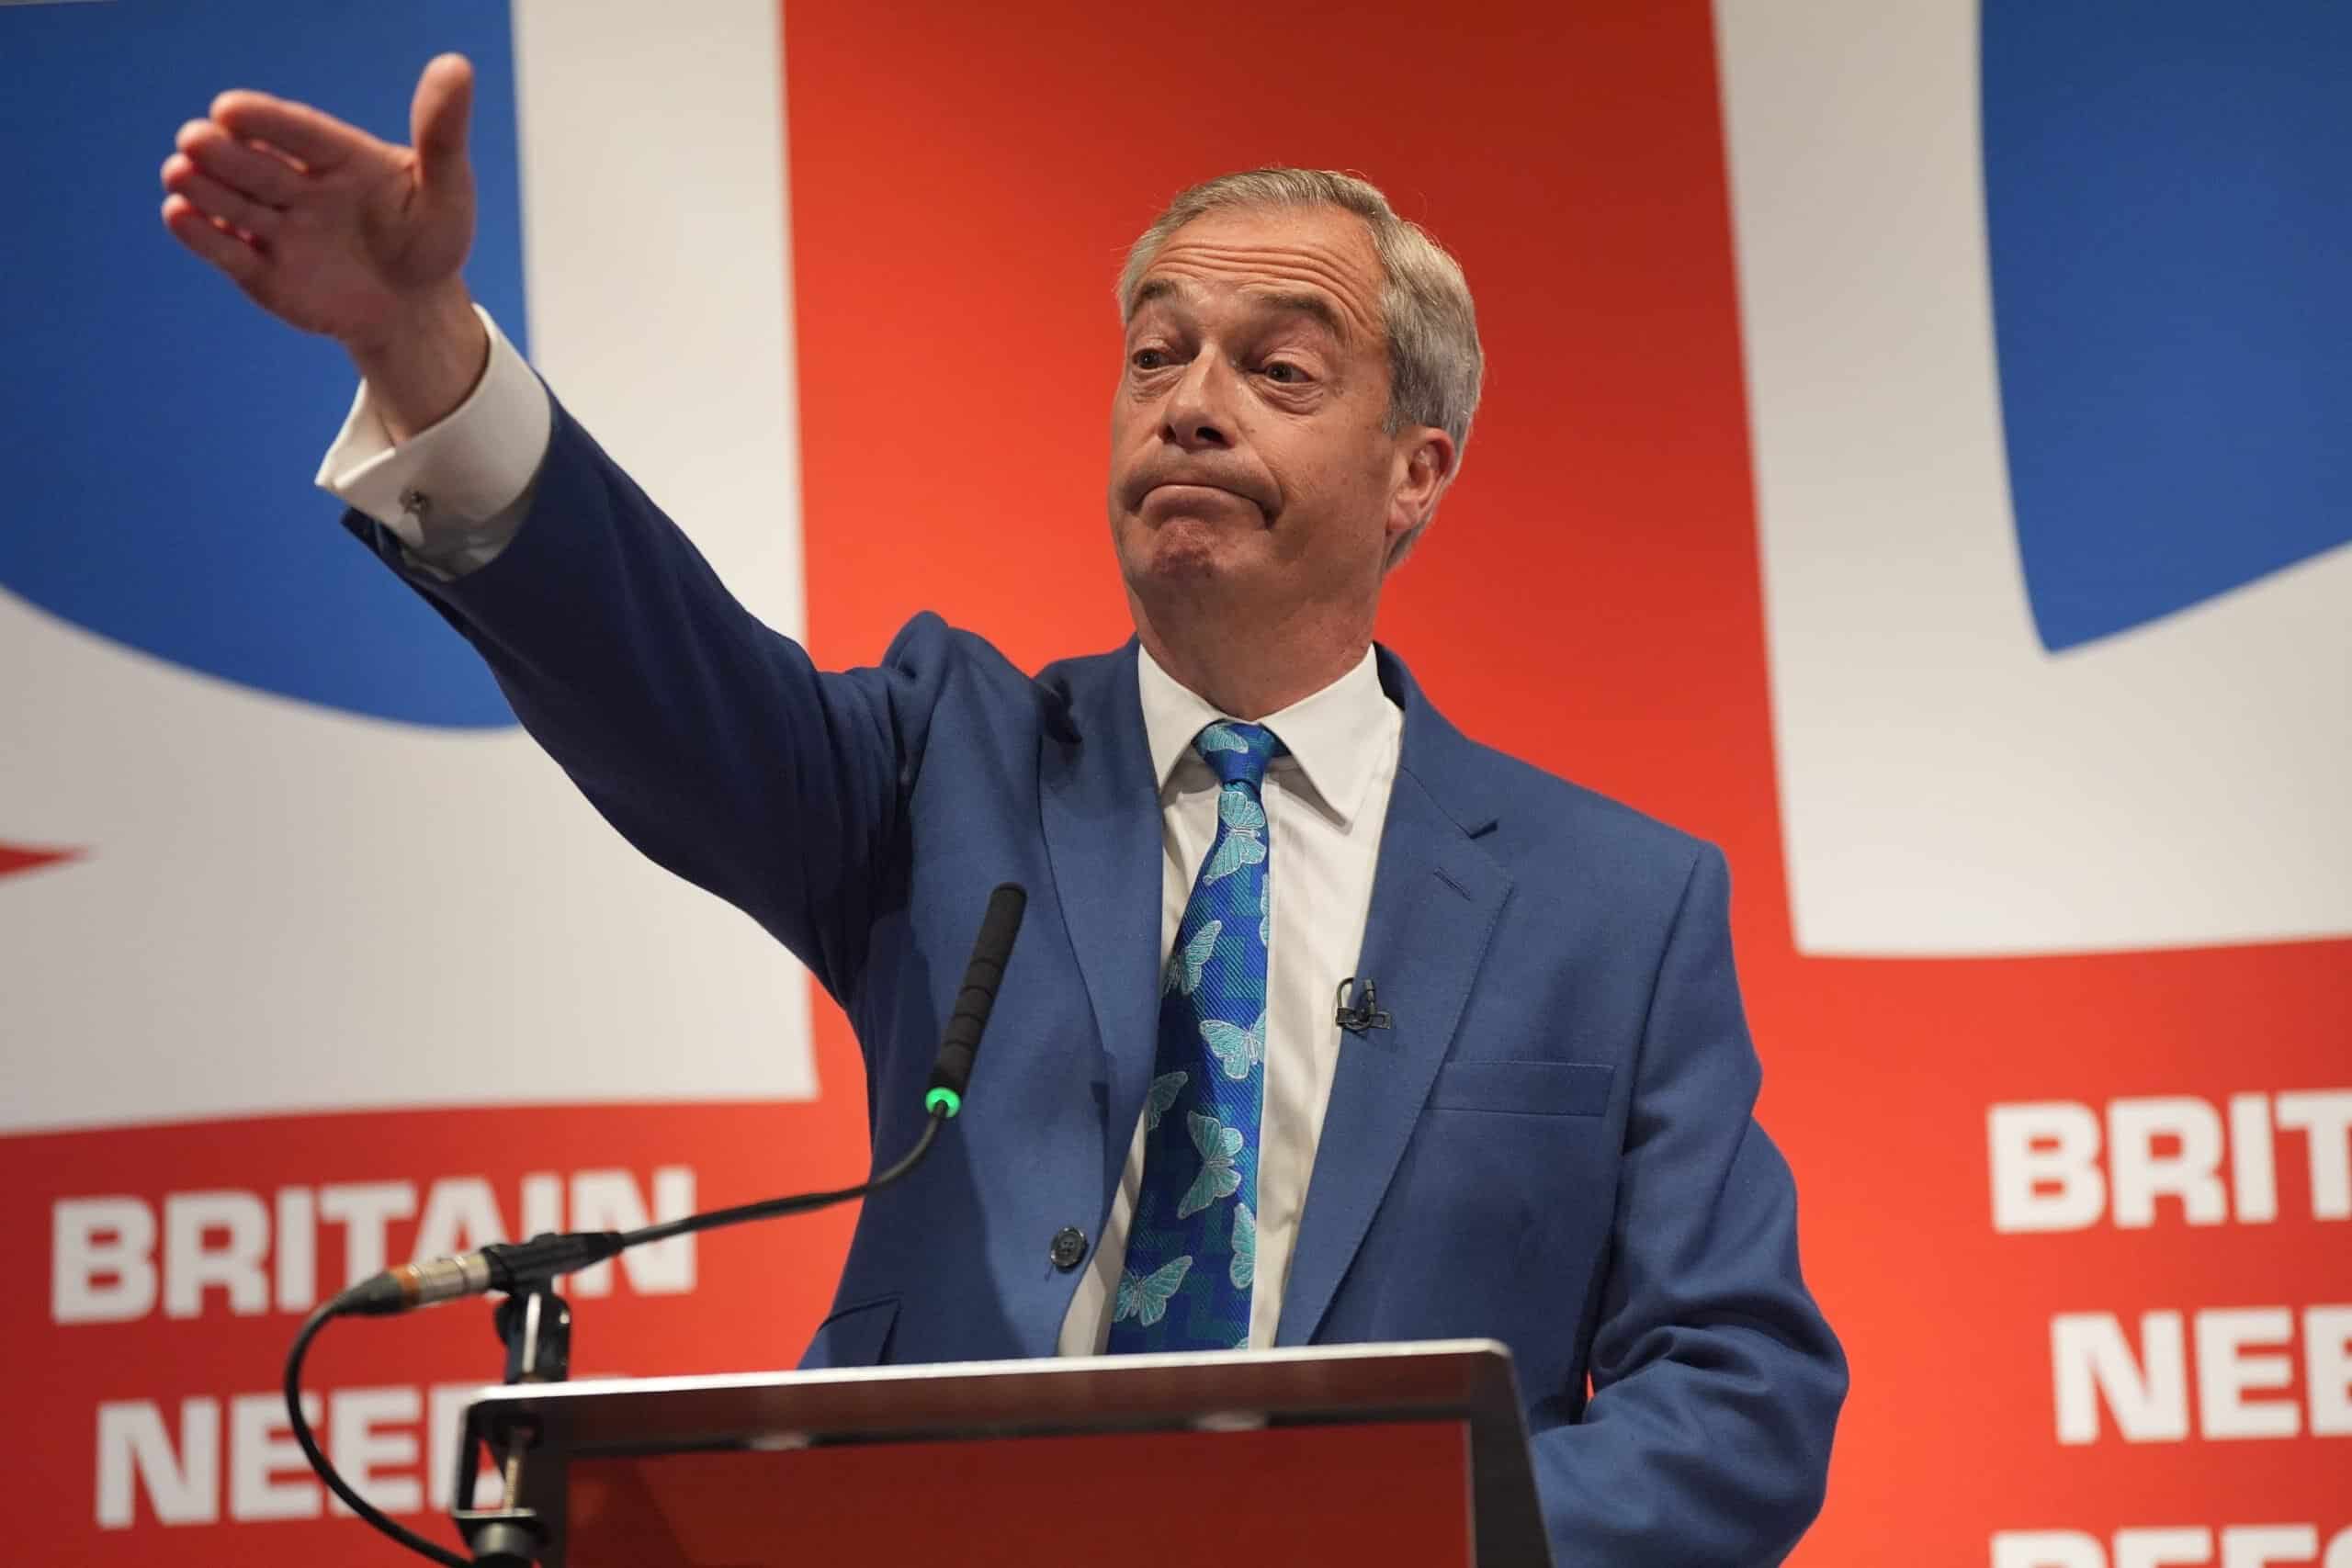 Nigel Farage sets out plan for ‘reverse takeover’ of Conservative Party